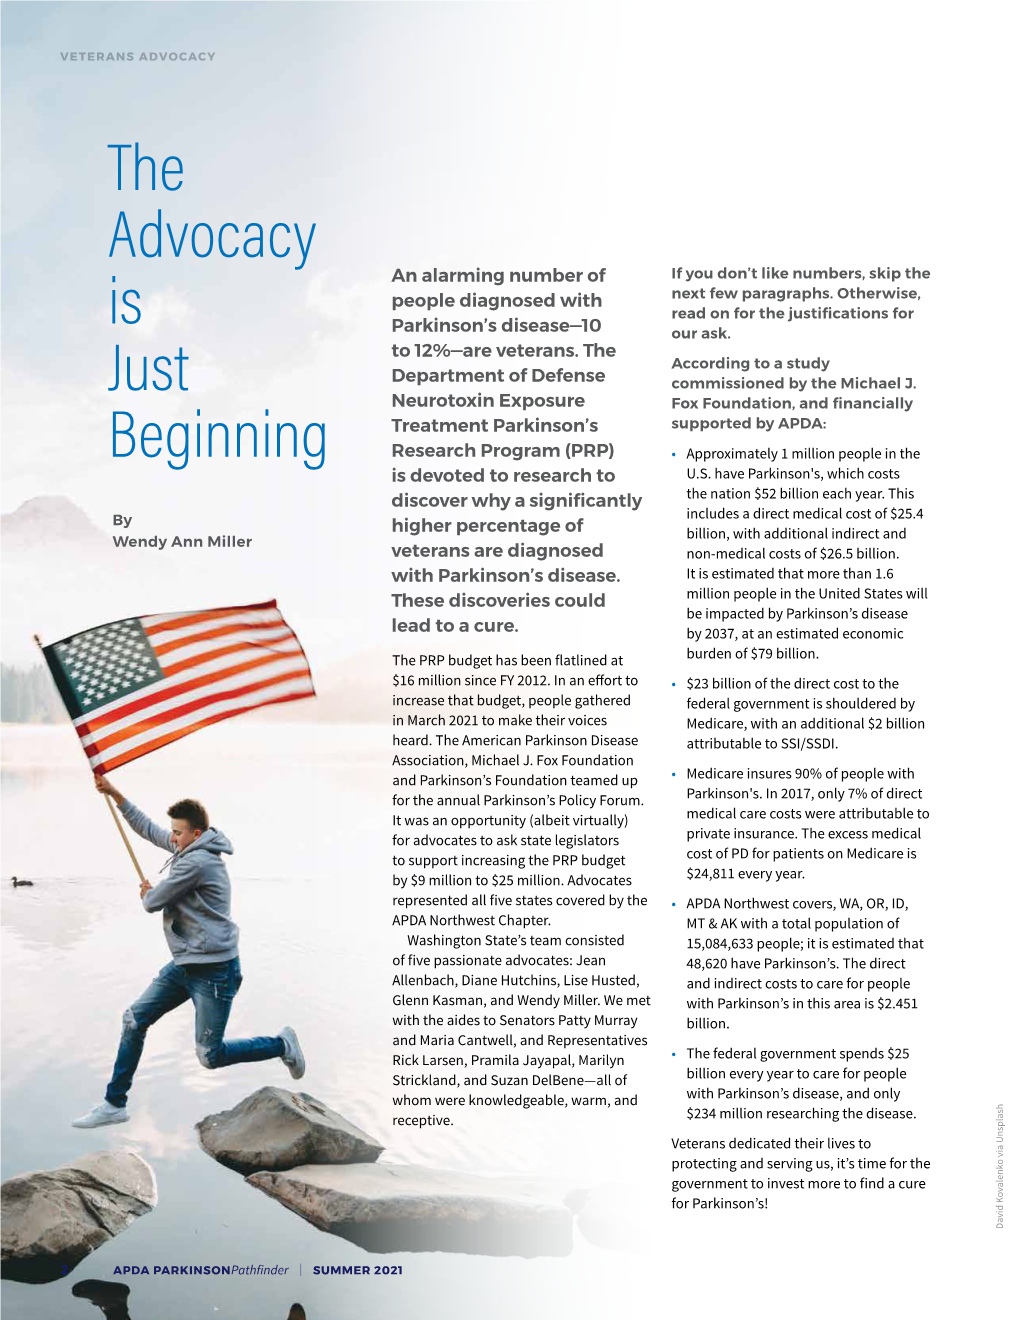 The Advocacy Is Just Beginning